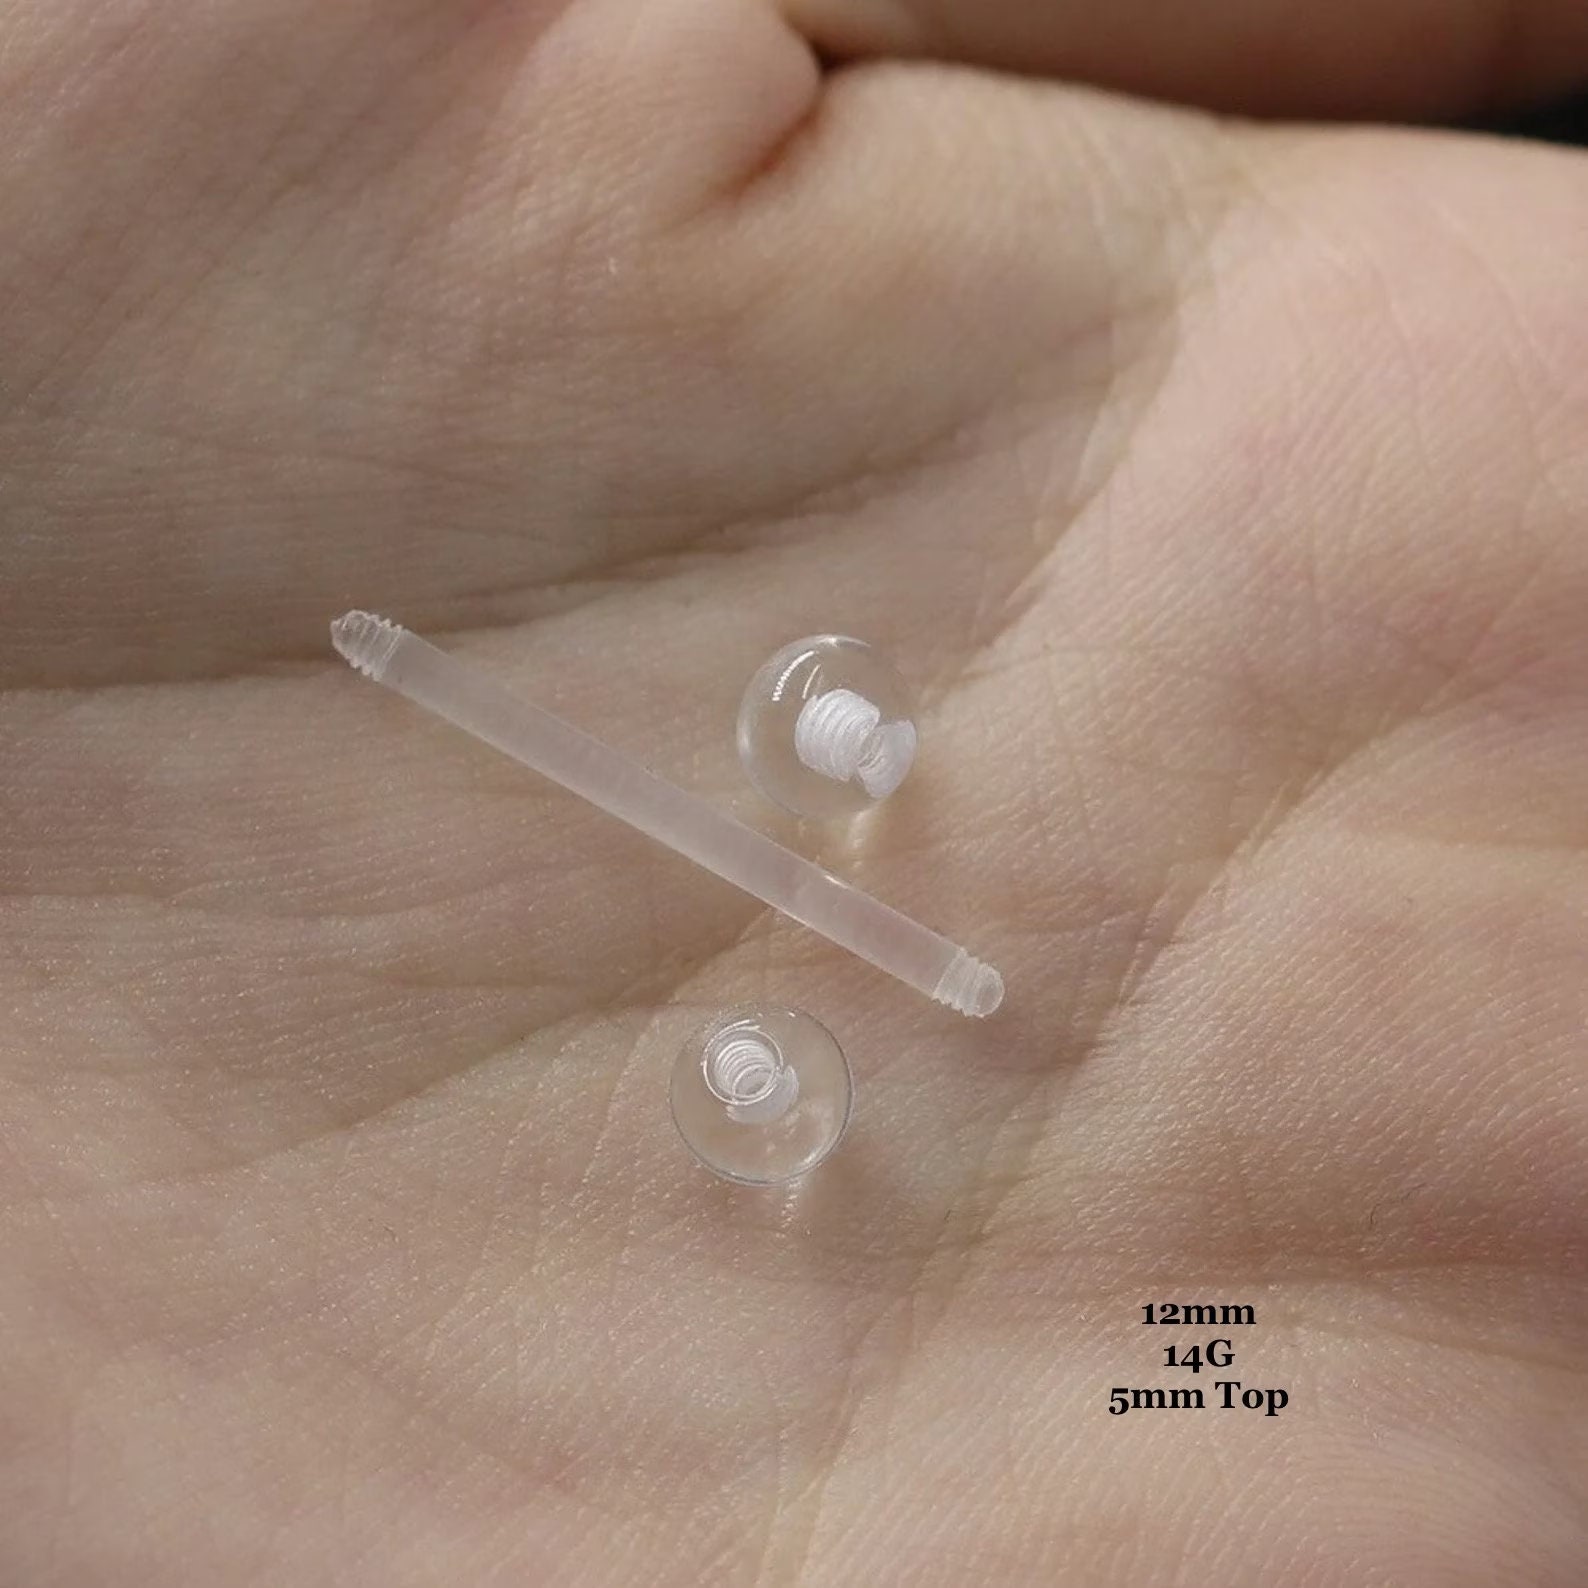 PiercingArt 24Pcs Plastic Earrings For Sensitive Ears Silicone Medical  Clear Tragus Cartilage Daith Studs Retainers 16G